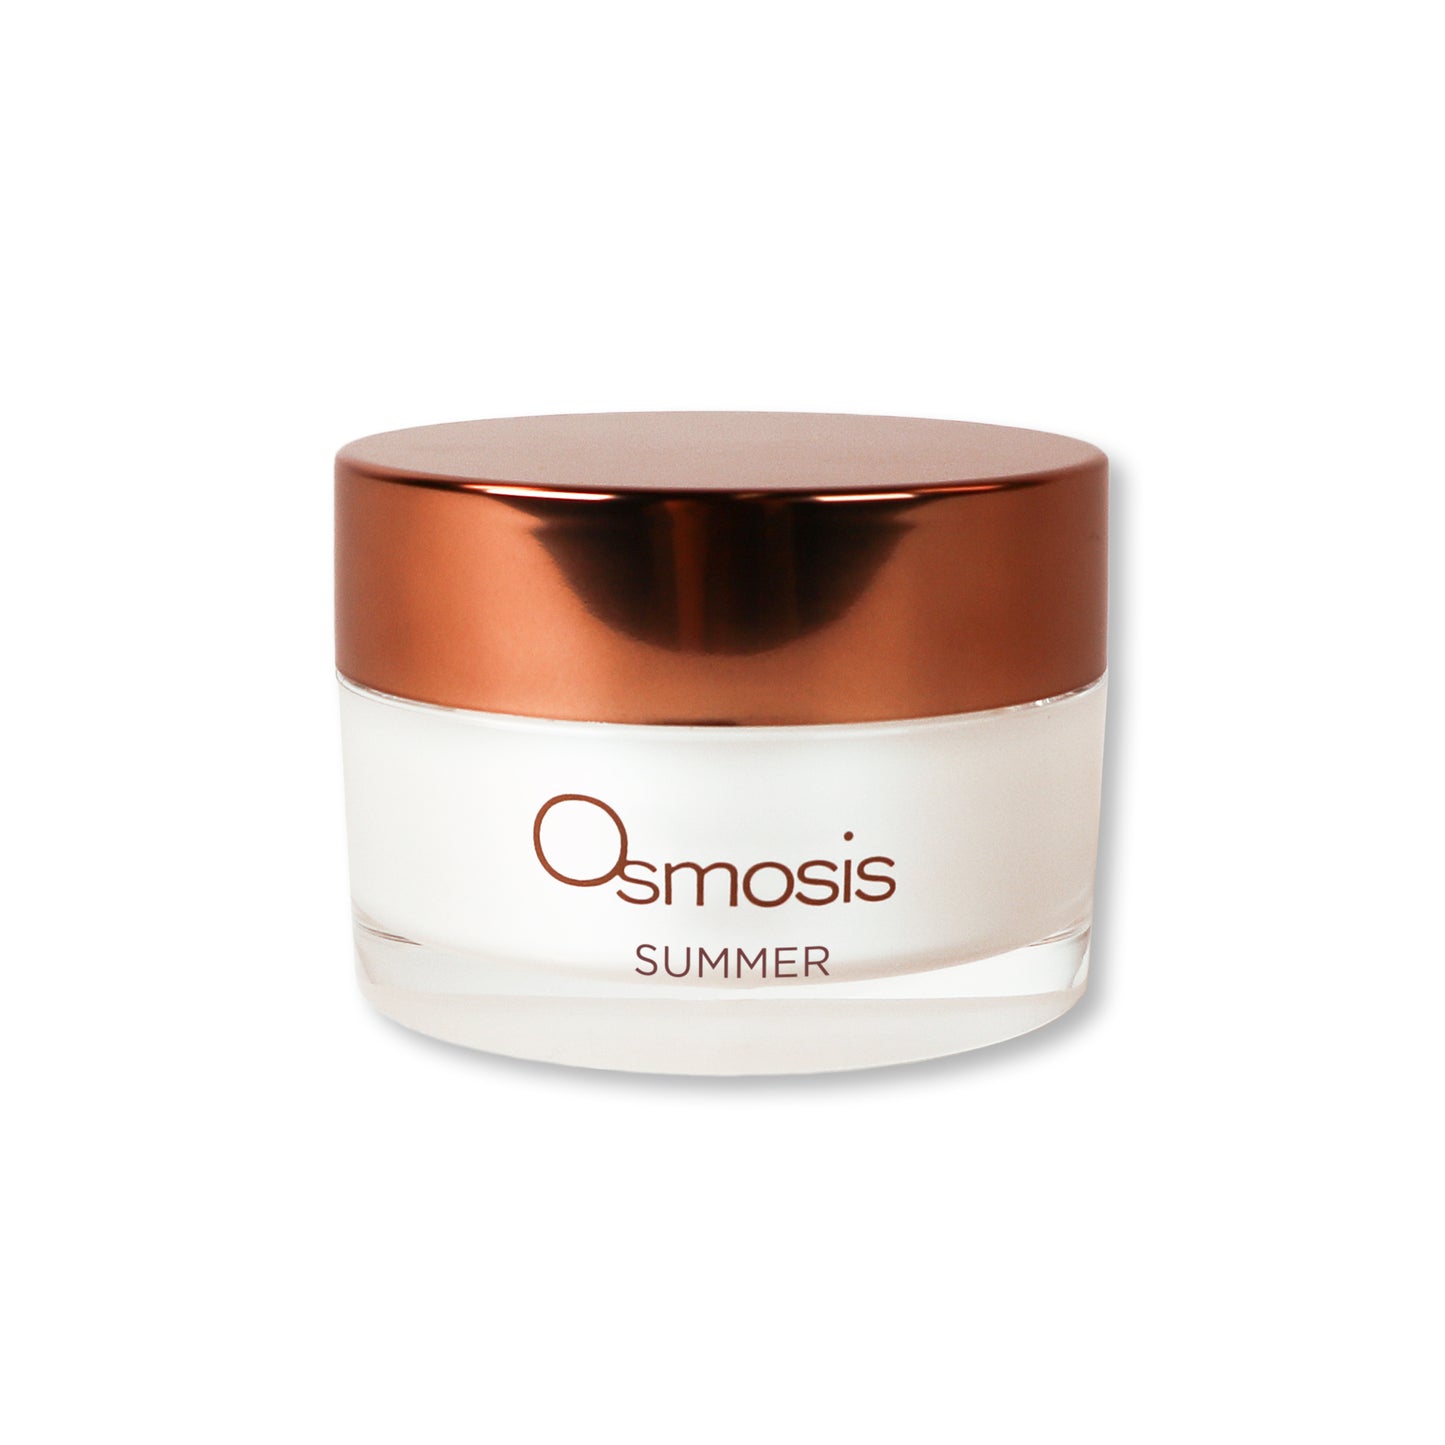 Osmosis Summer Enzyme Mask